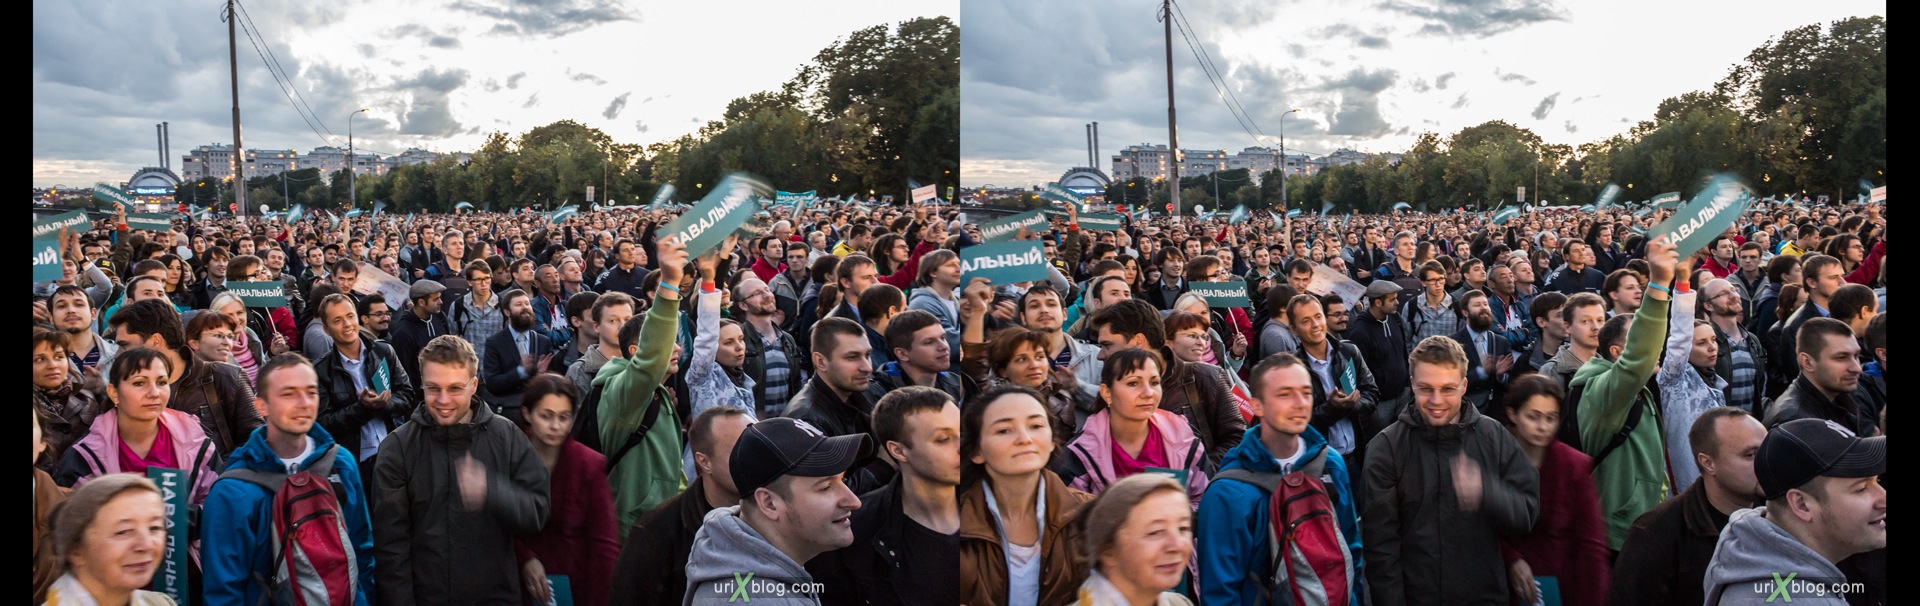 2013, Russia, Moscow, meeting, rally, elections, Aleksei Navalny, people, 3D, stereo pair, cross-eyed, crossview, cross view stereo pair, stereoscopic